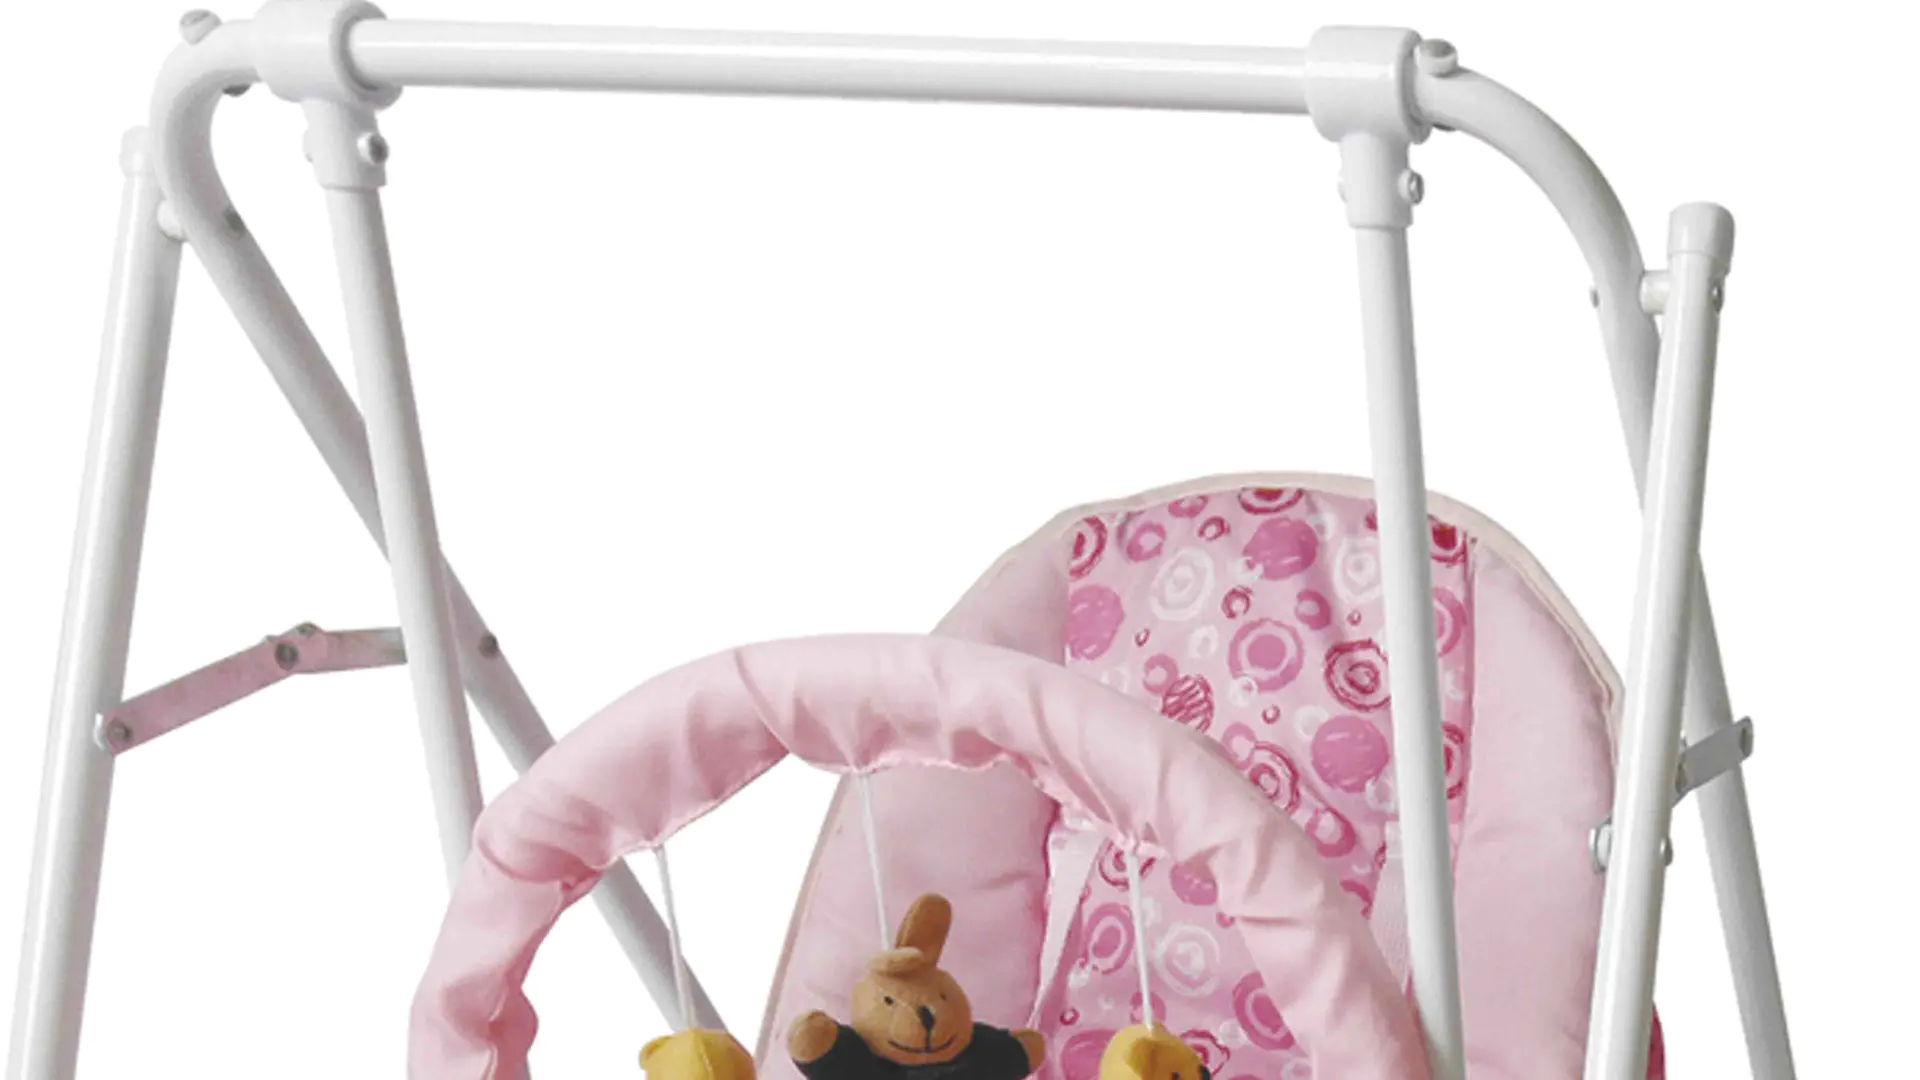 Wholesale metal bouncer cheap baby swings for sale Aoqi Brand